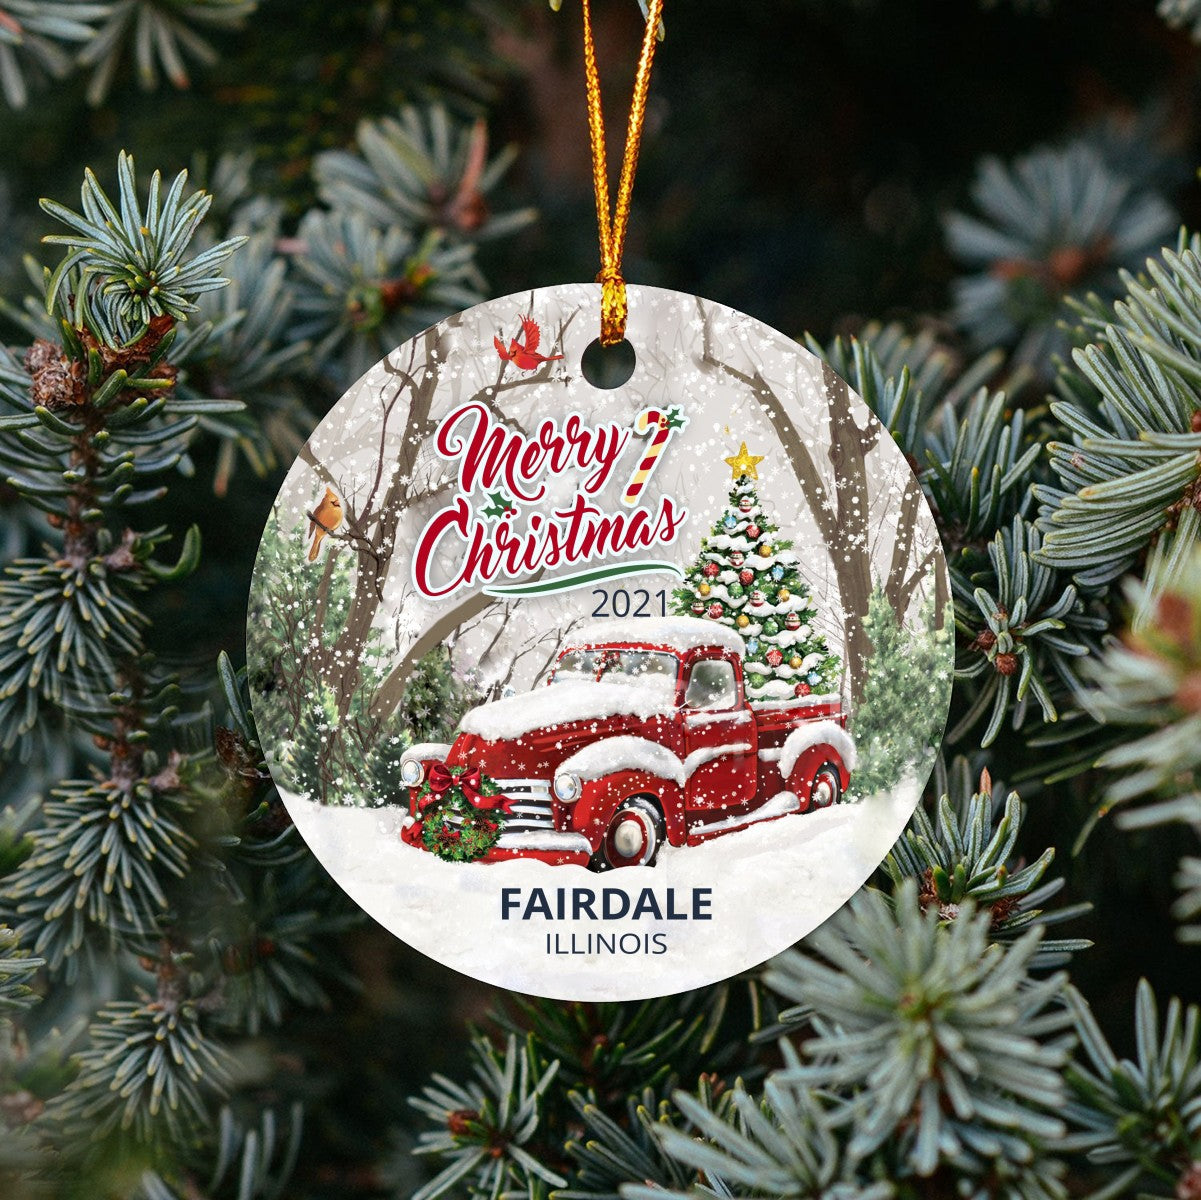 Christmas Tree Ornaments Fairdale - Ornament With Name City, State Fairdale Illinois IL Ornament - Red Truck Xmas Ornaments 3'' Plastic Gift For Family, Friend And Housewarming